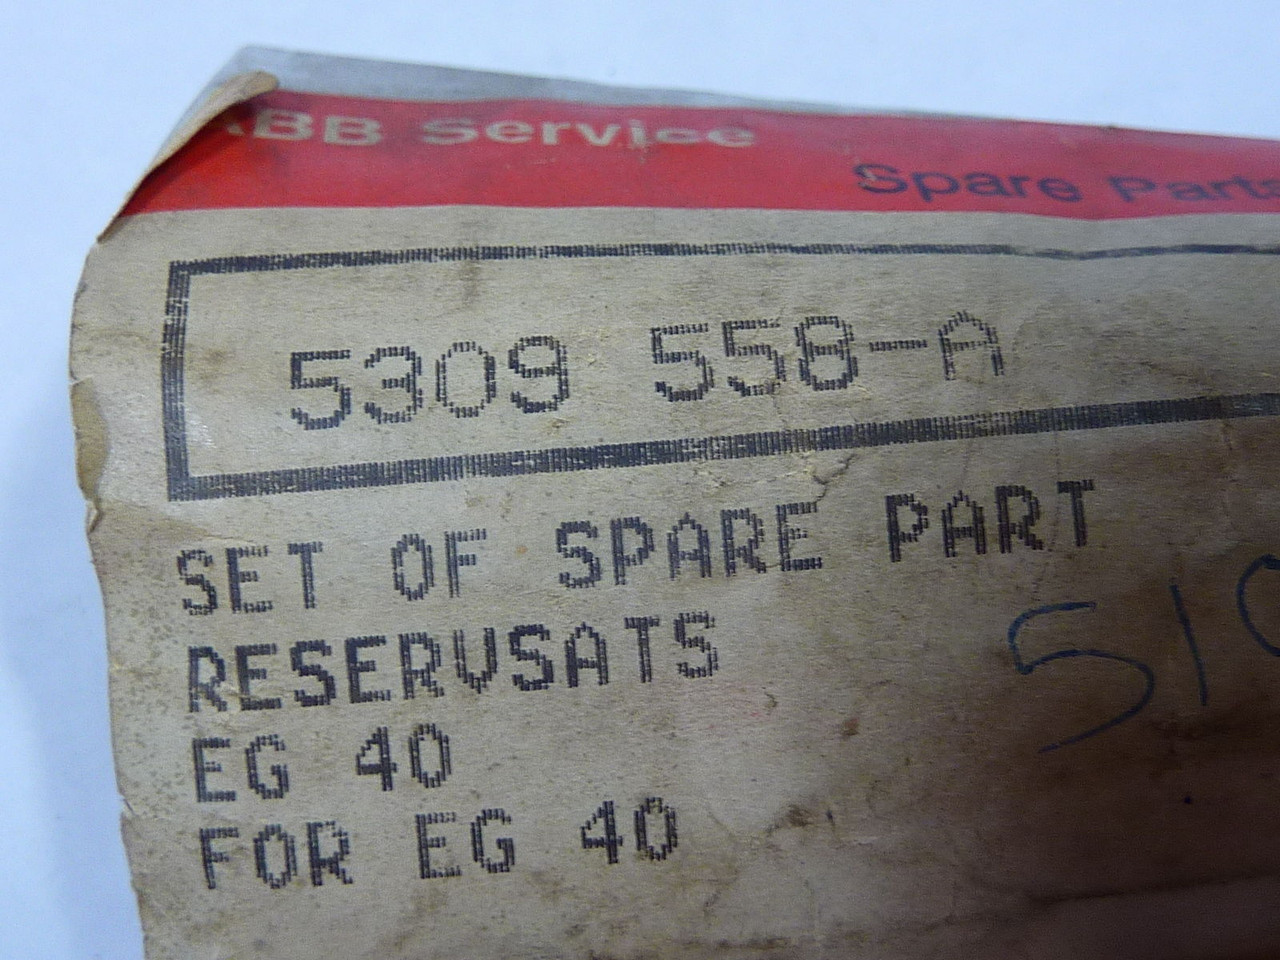 ABB 5309-588-A Spare Parts for EG-40 ! NEW !